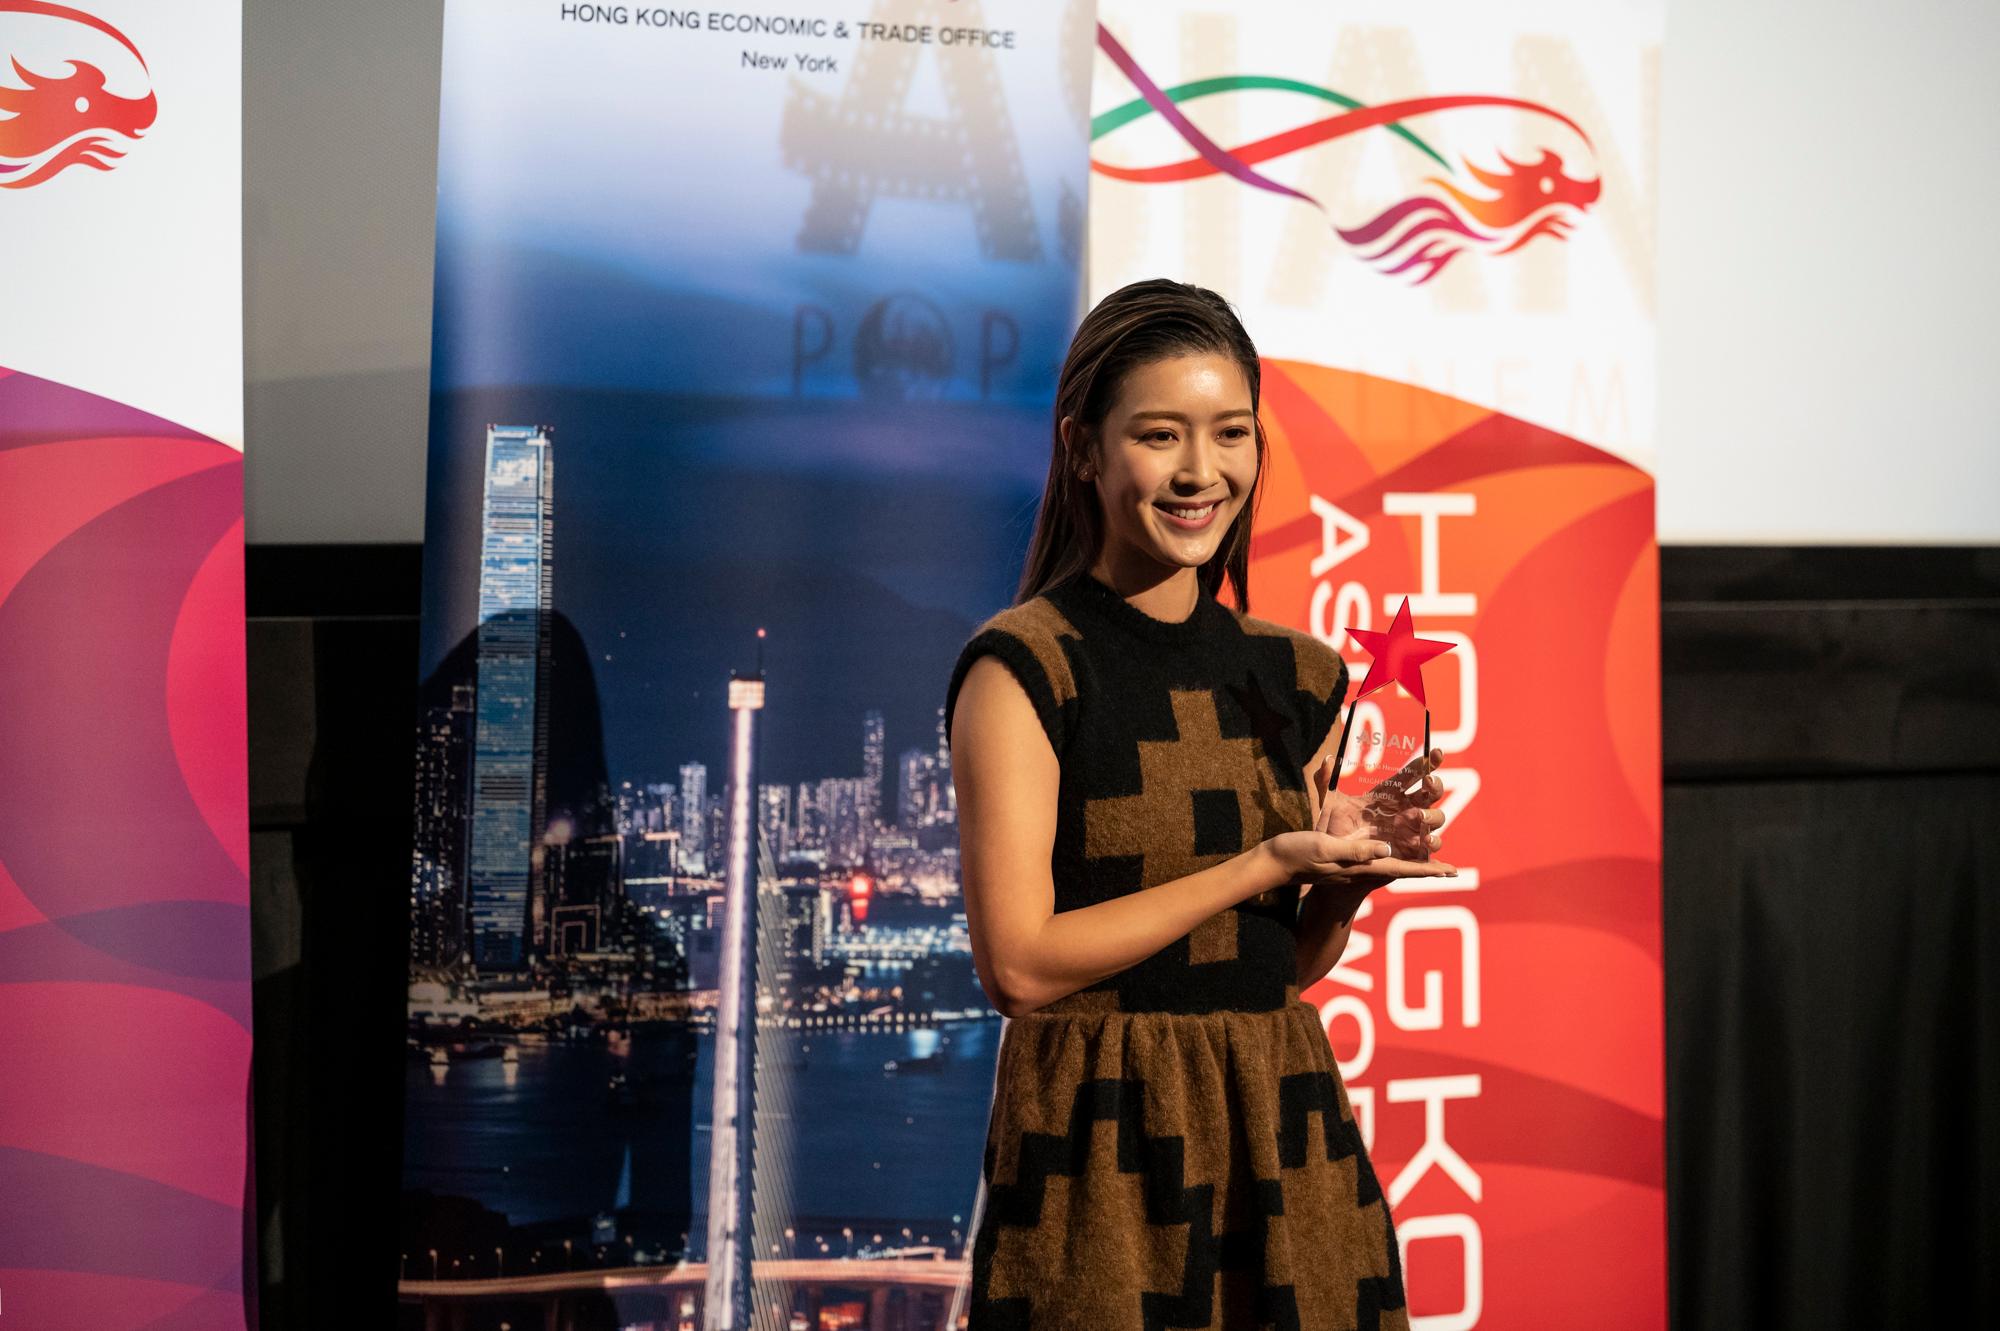 Hong Kong actress Jennifer Yu was presented with the Bright Star Award by Chicago's Asian Pop-Up Cinema on November 6 (Chicago time).